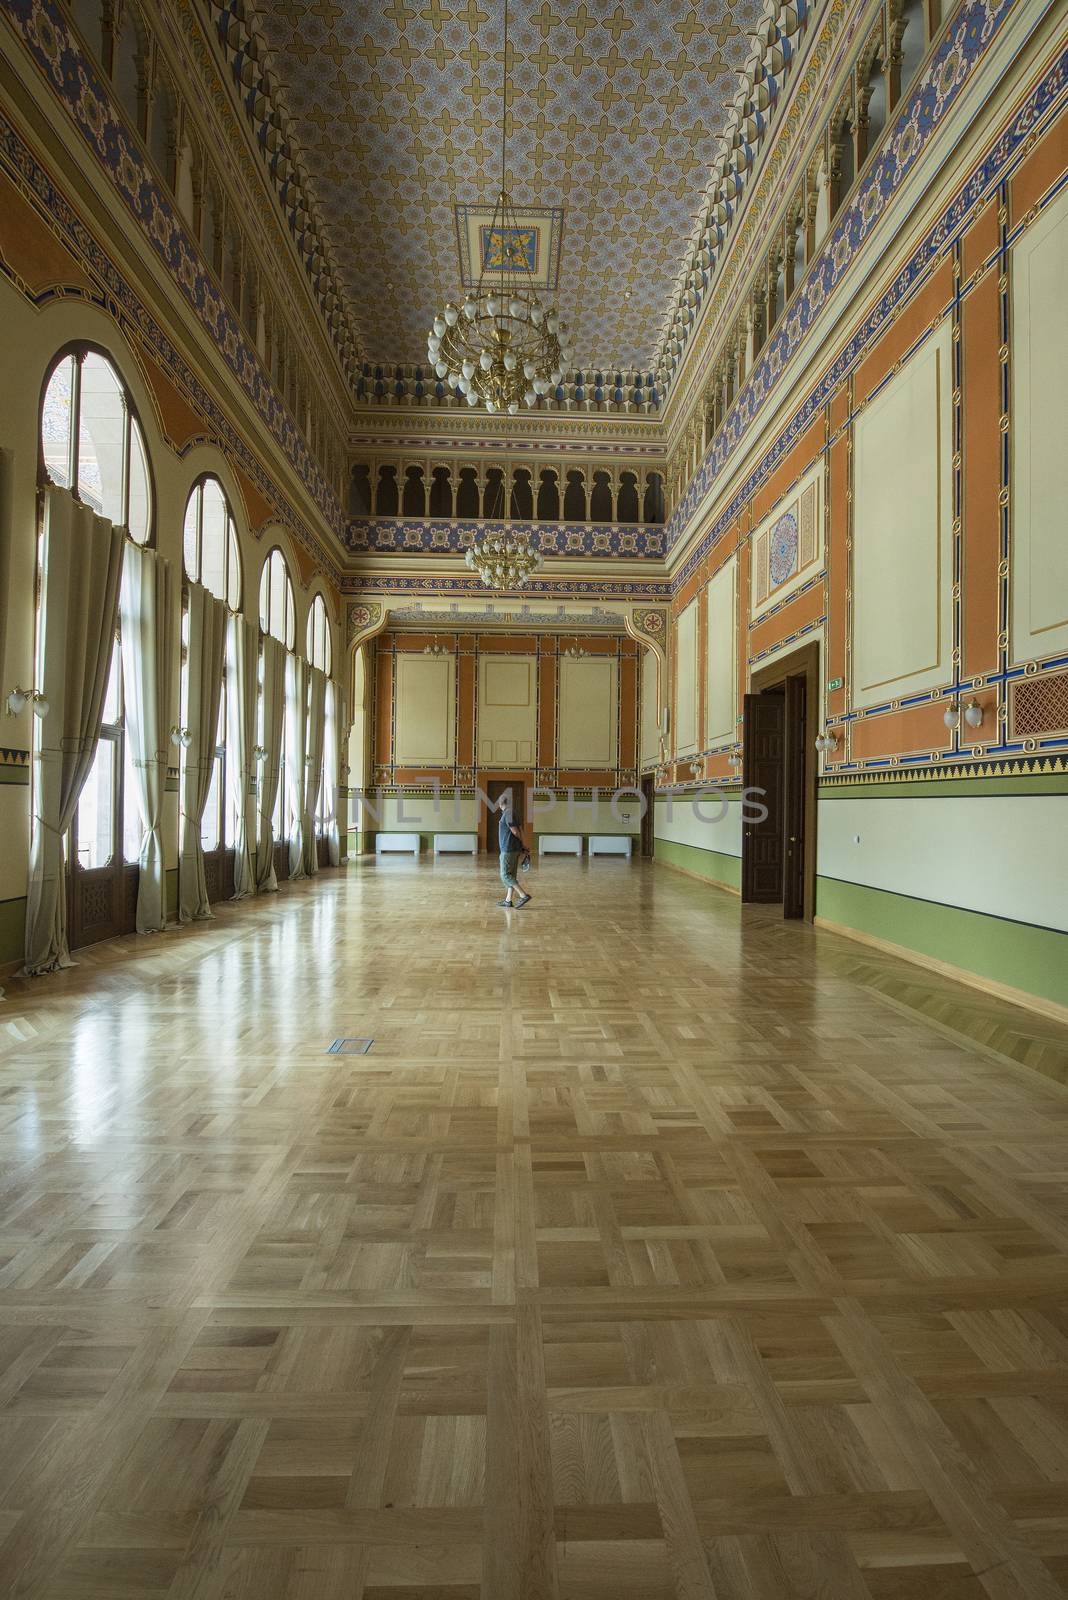 view of the interior of the Sarajevo National Library